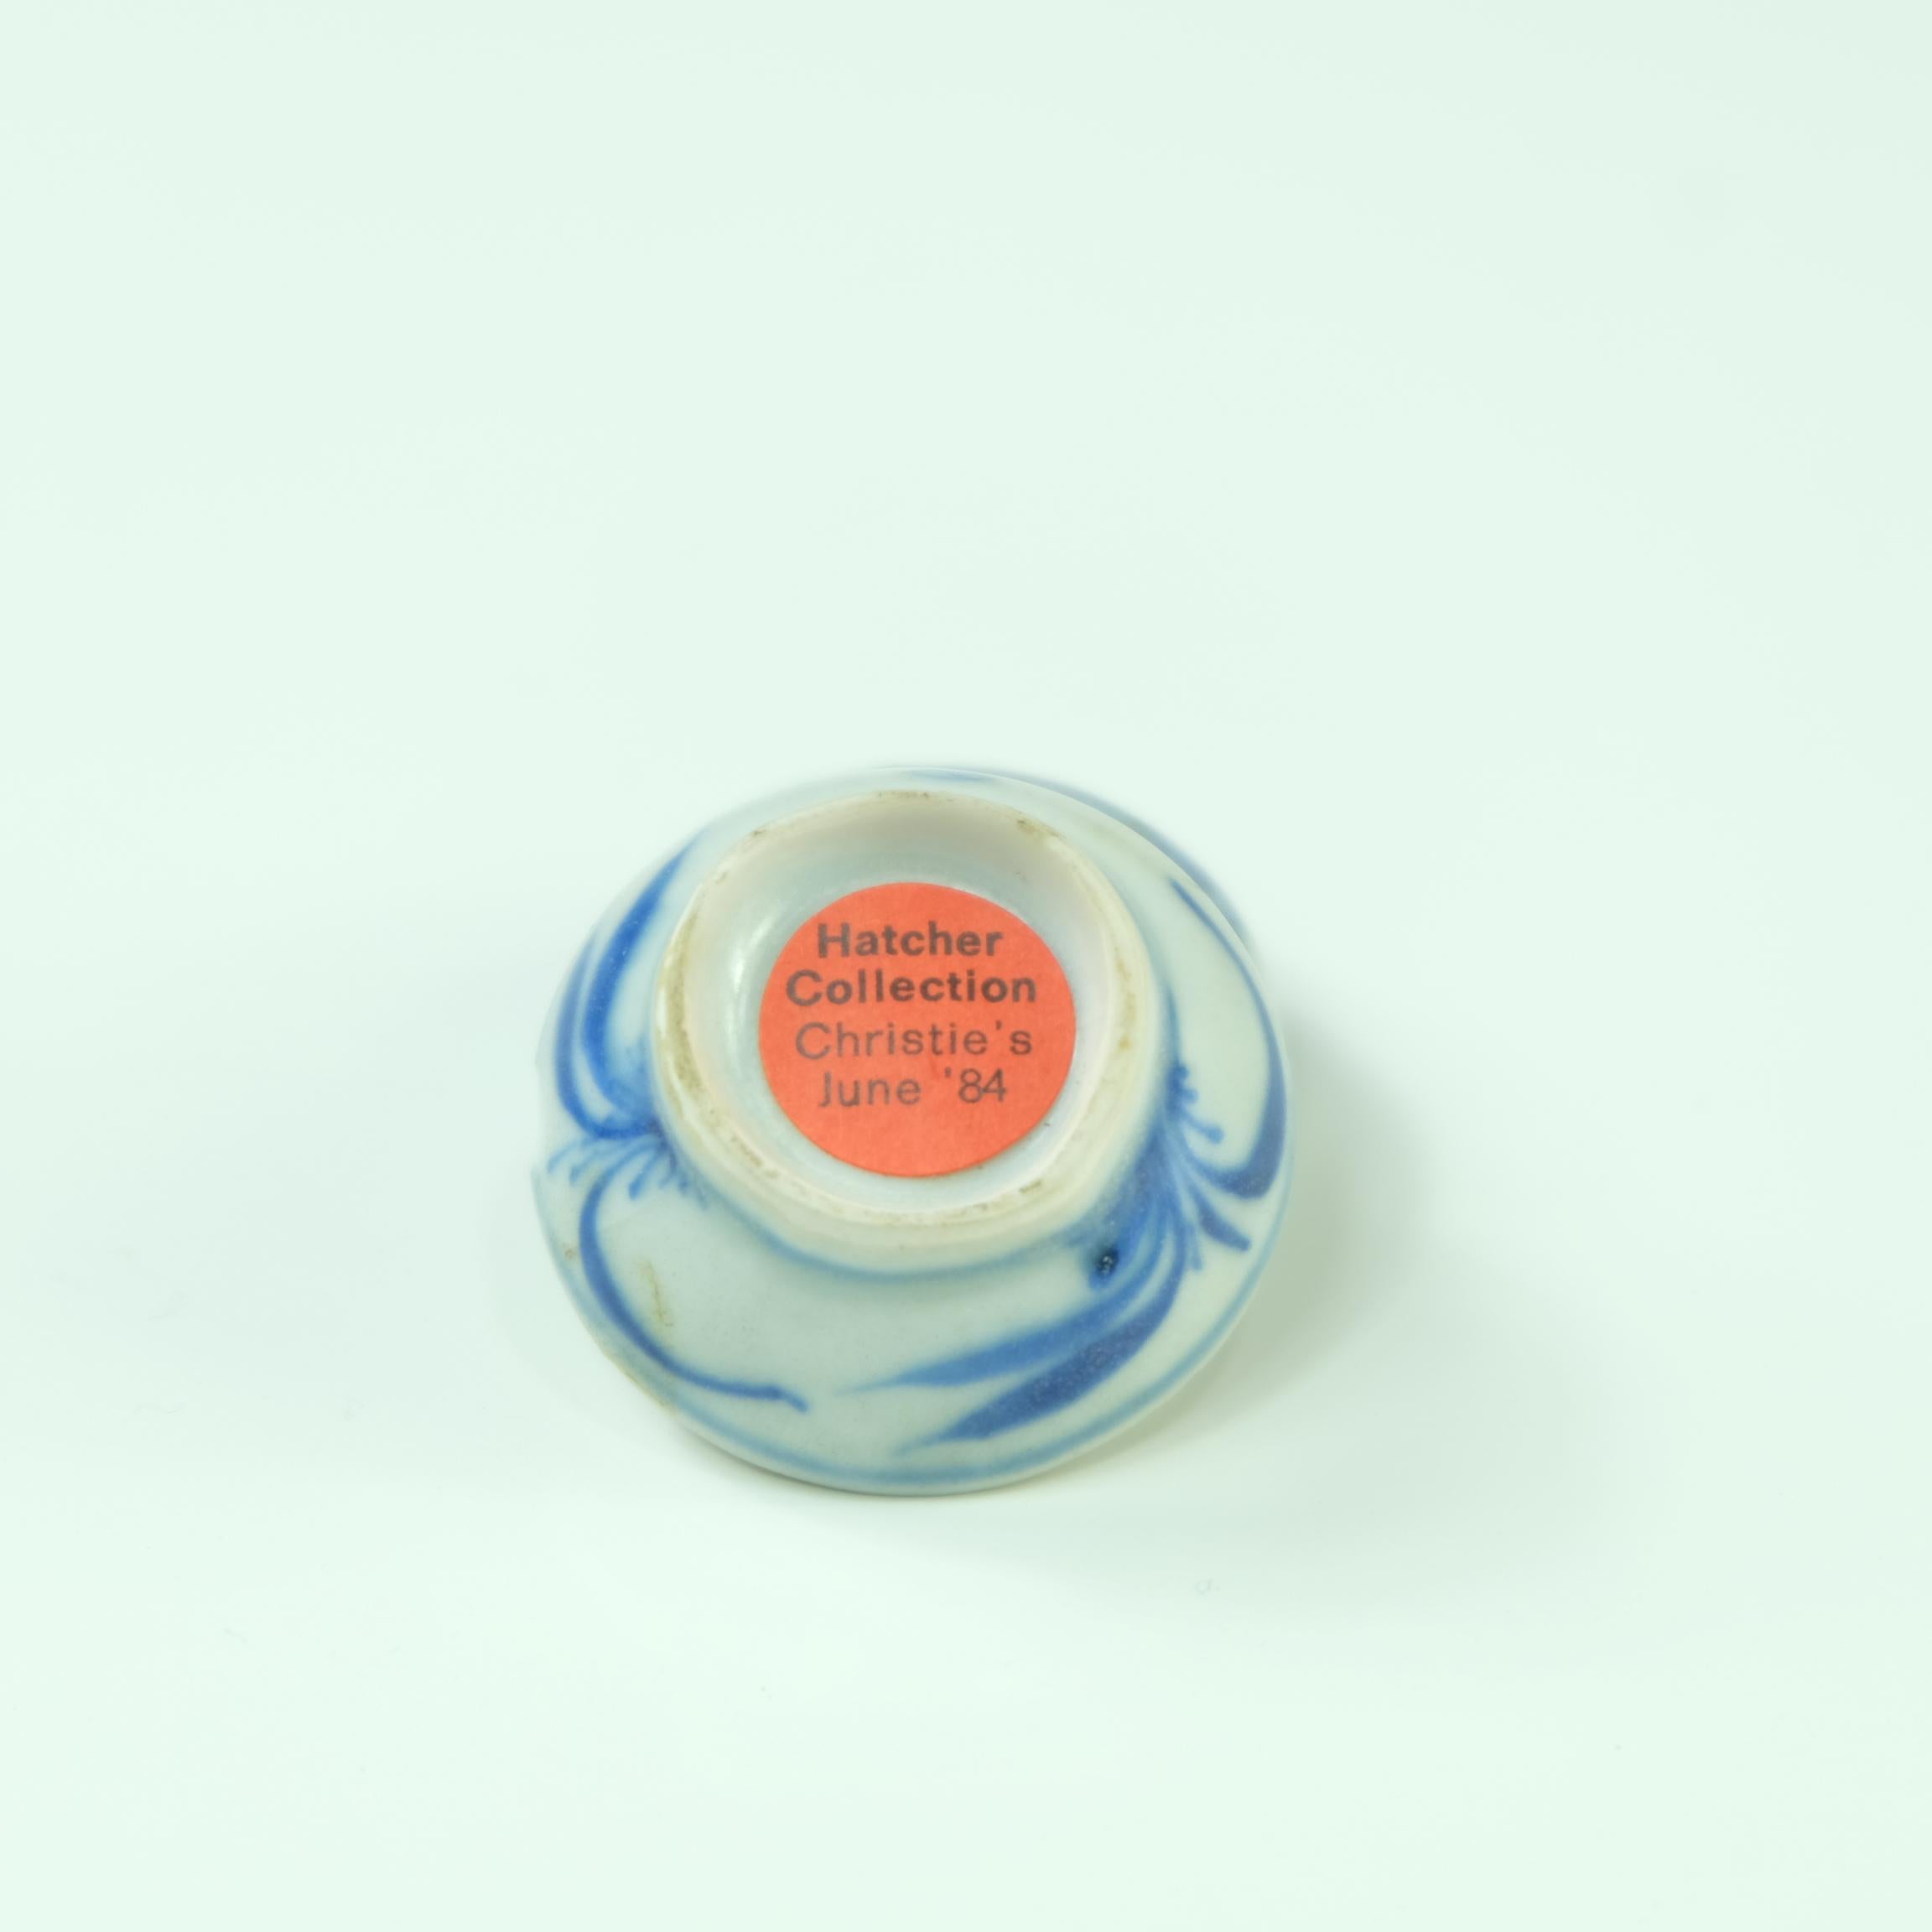 Asian Porcelain Medicinal Pill Box from the 'the Hatcher Junk circa 1643-1646' For Sale